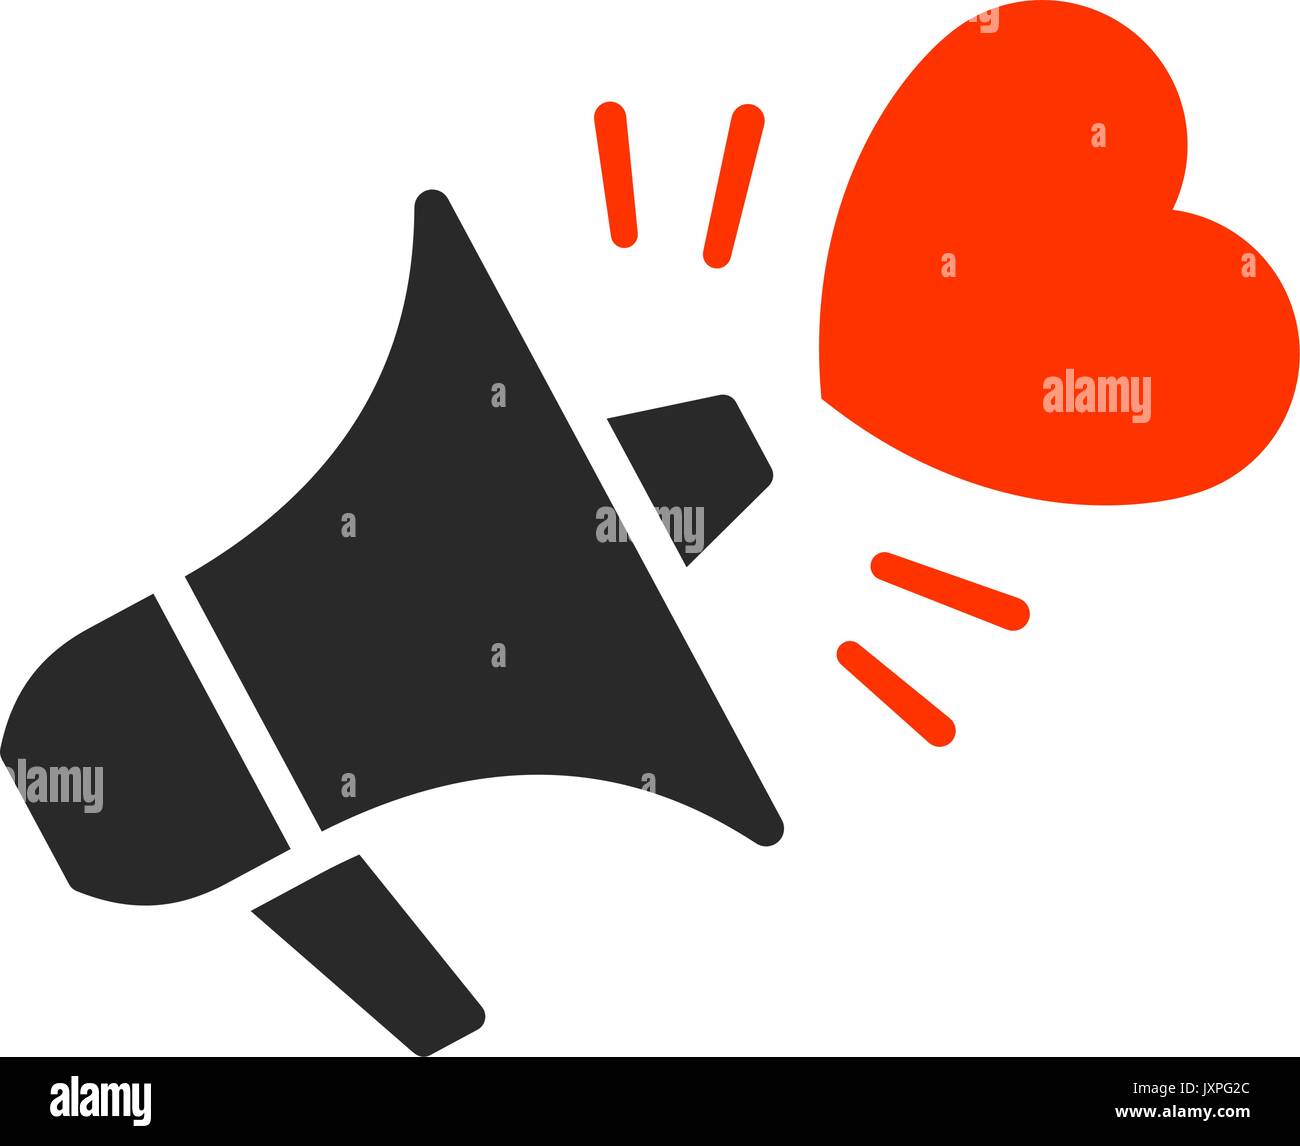 Isolated black megaphone with red heart symbol moving outward from it over white background, vector illustration Stock Vector